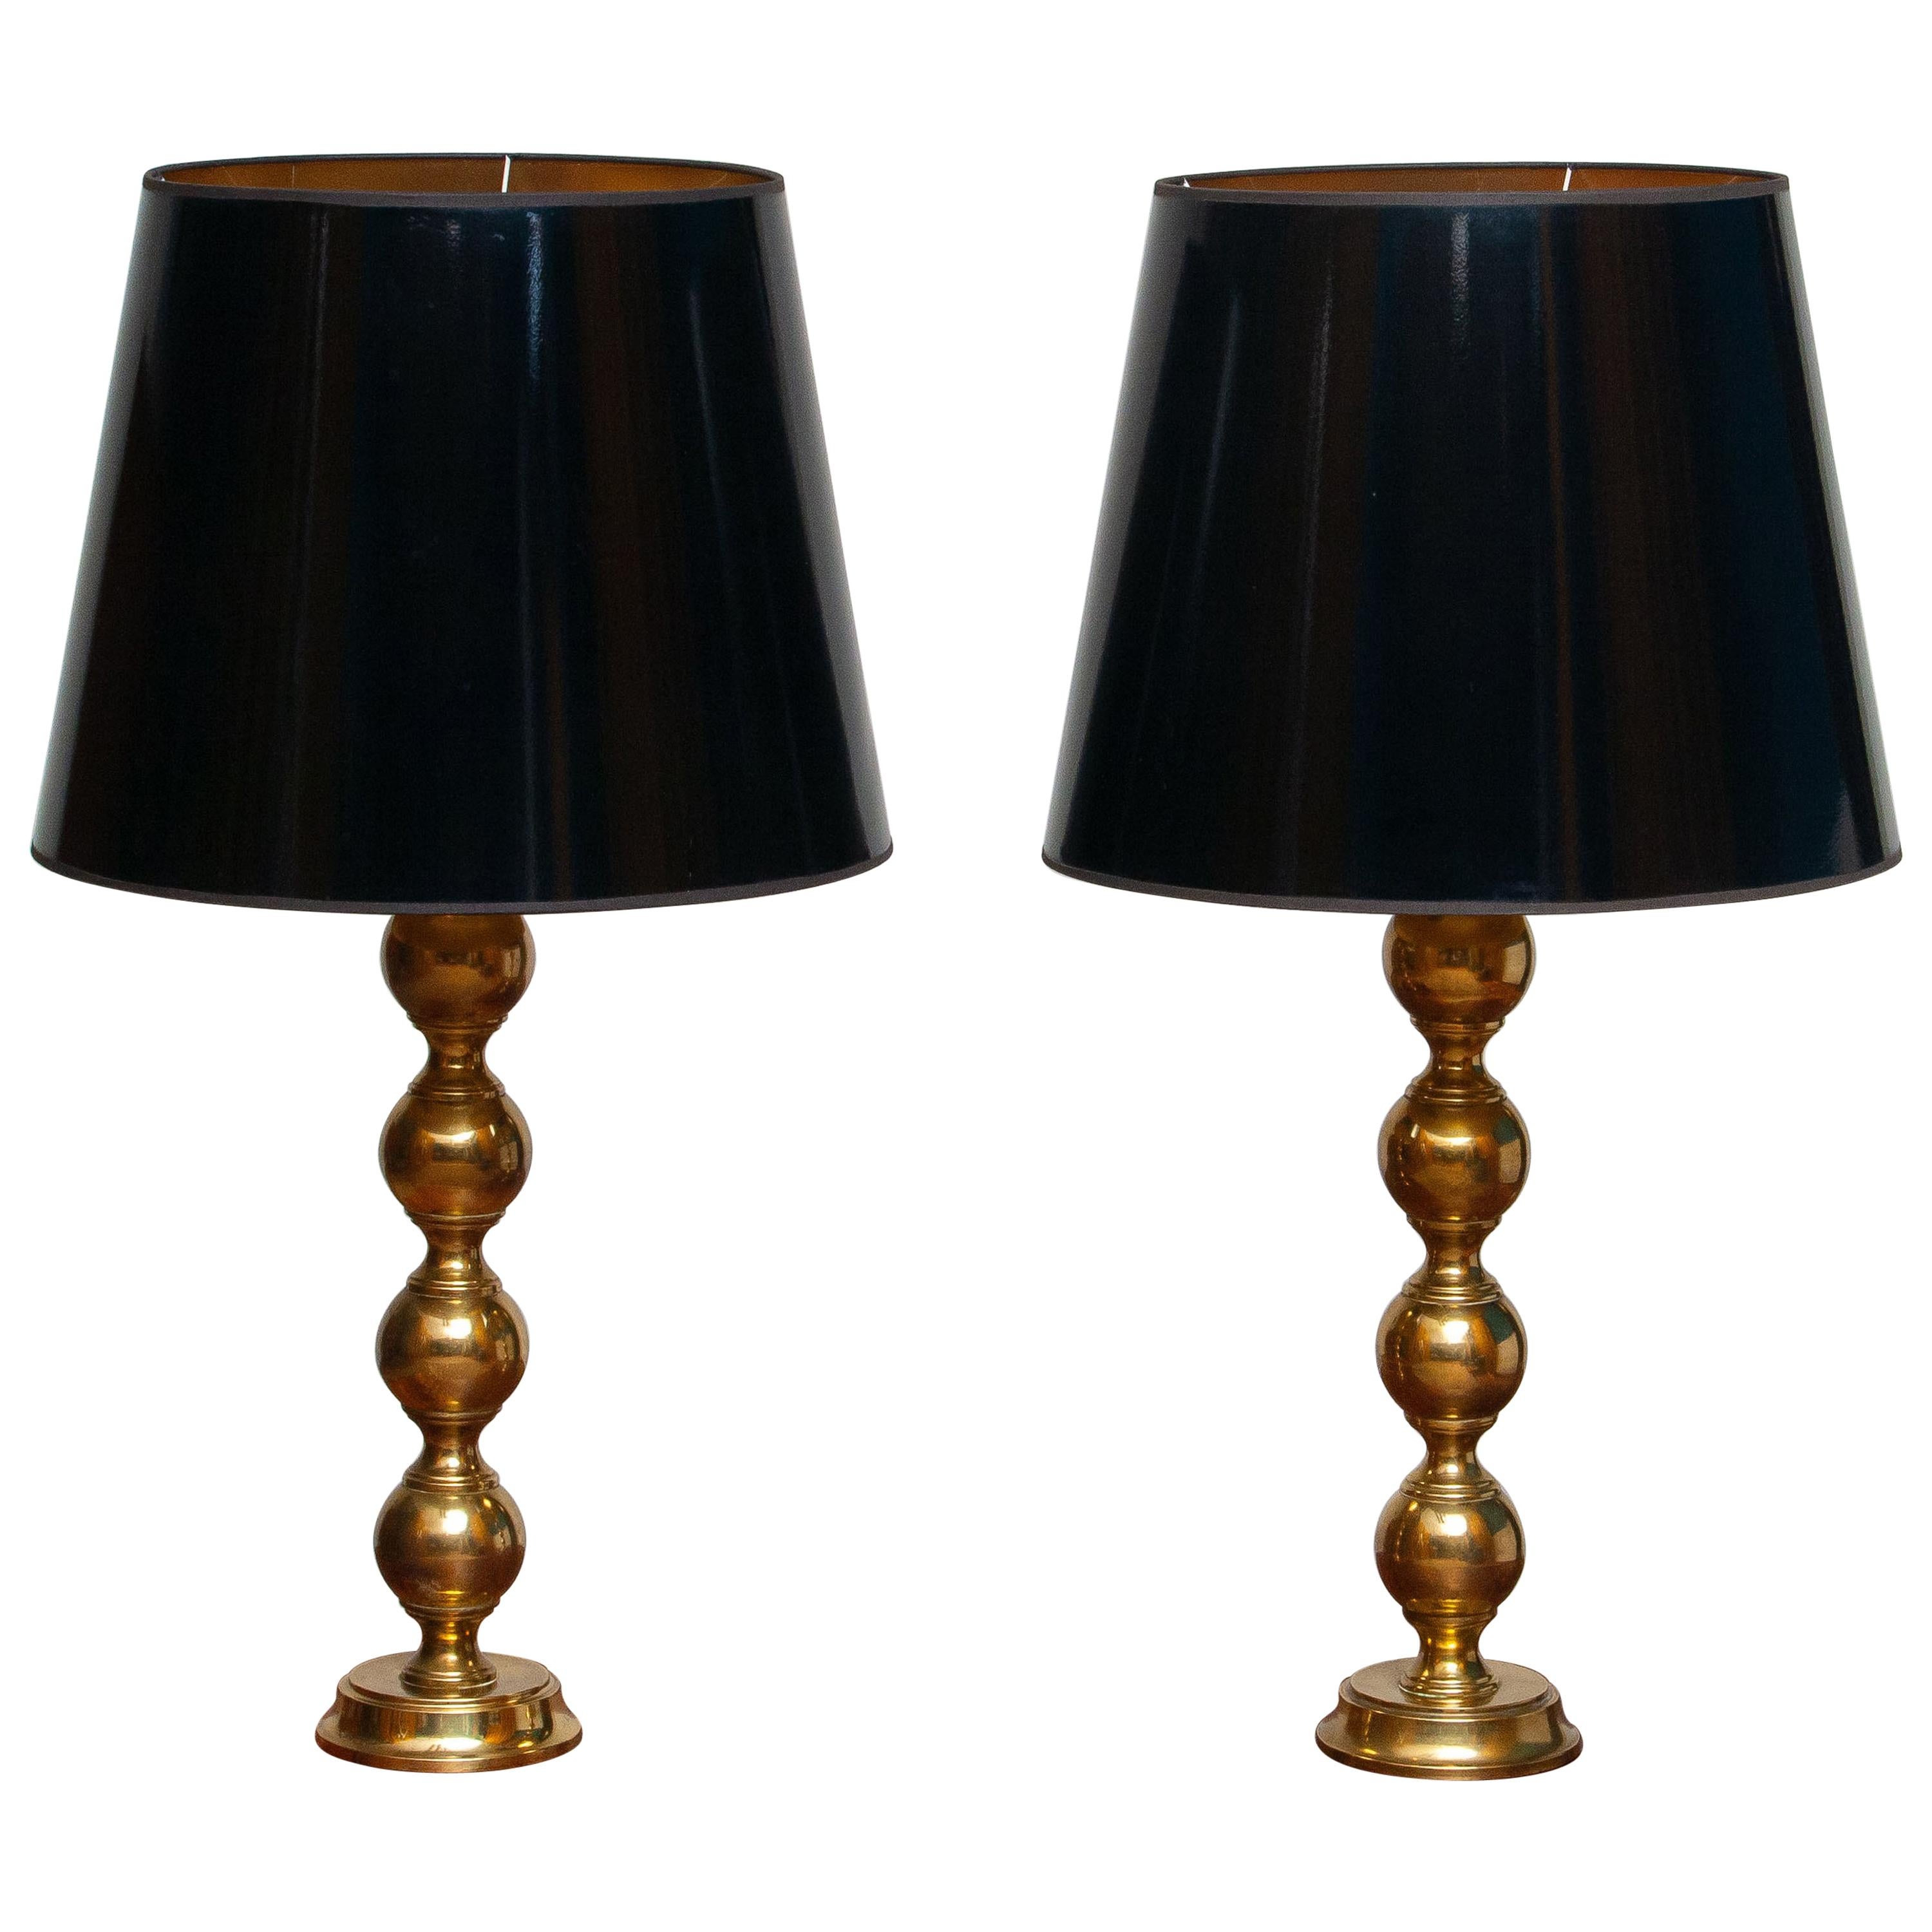 Hollywood Regency 1950s, Set of Brass Spherical Extra Large Swedish Table Lamps with Black Shades